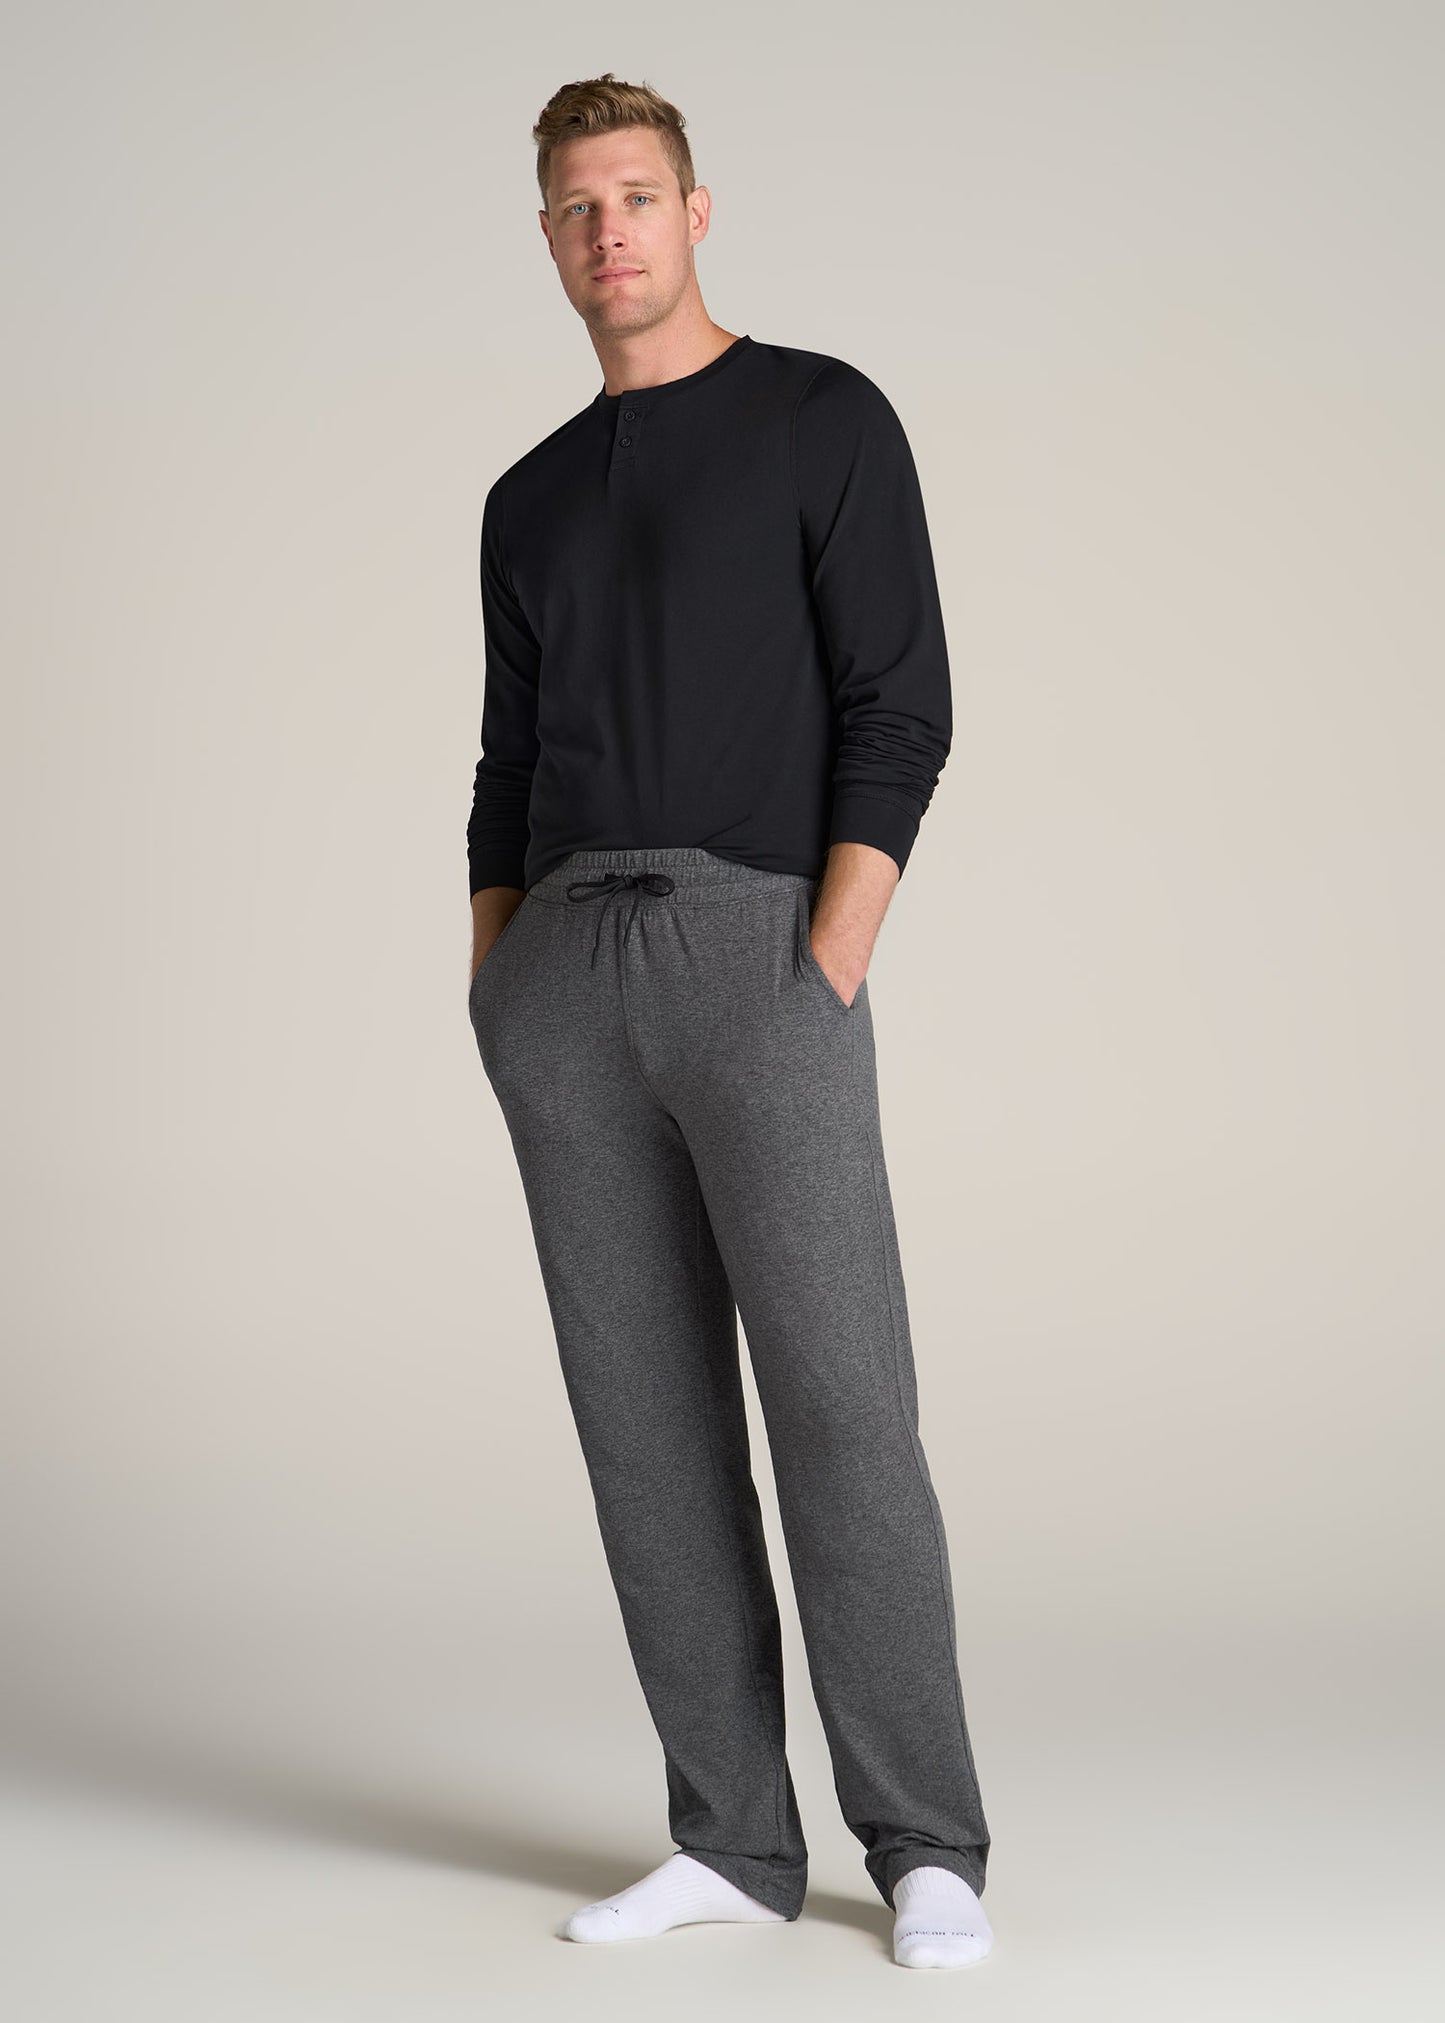 American-Tall-Men-Weekender-Stretch-Lounge-Pant-Charcoal-Mix-full